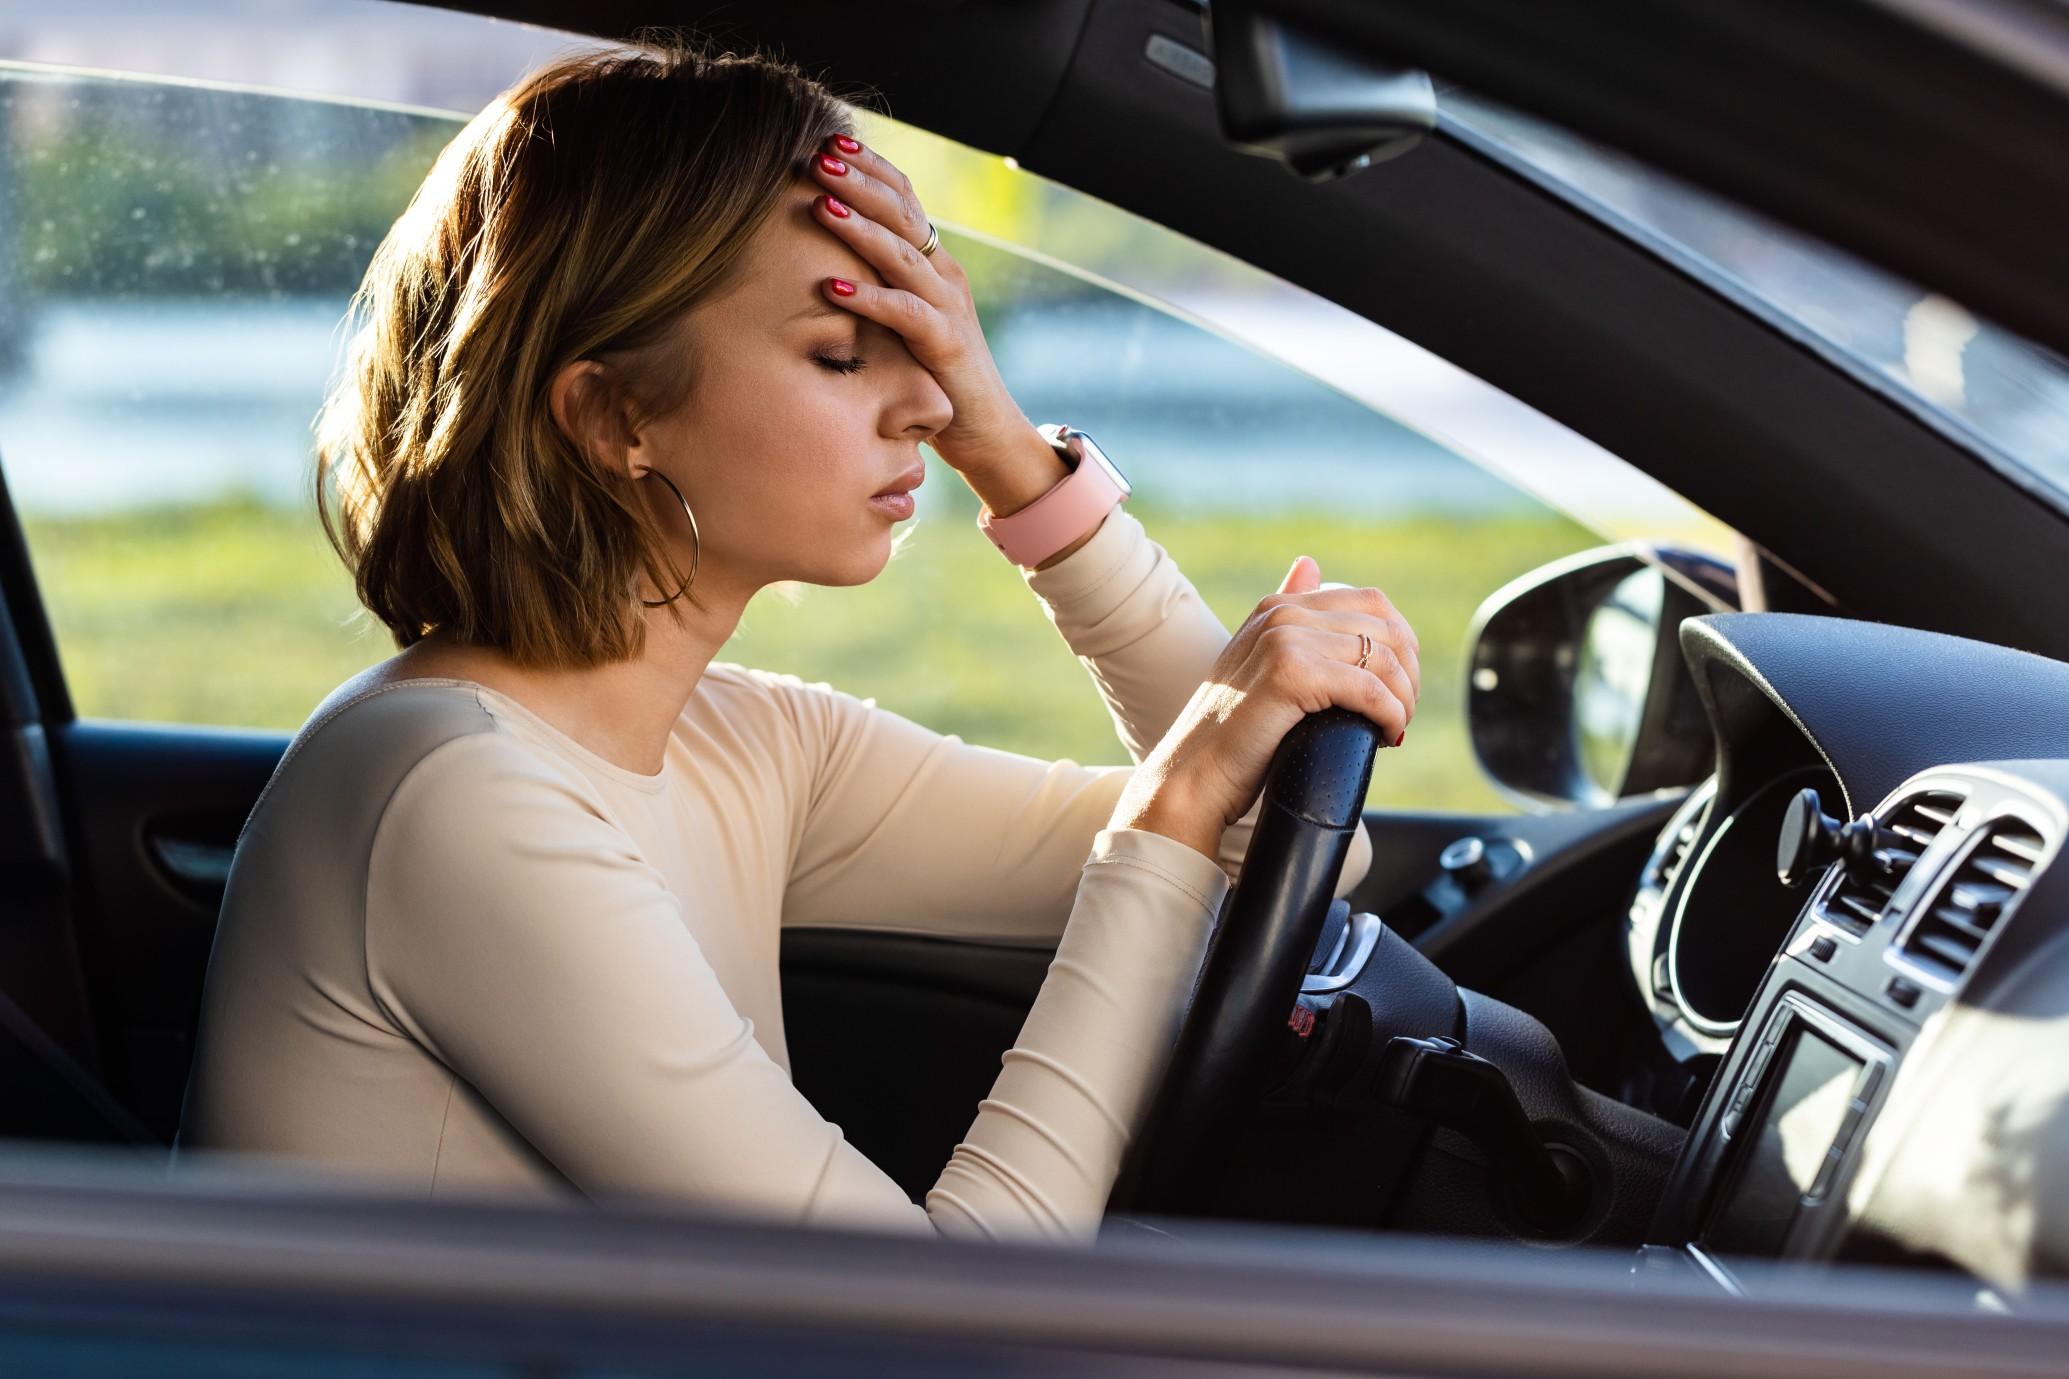 If you often get anxiety while driving, there are steps you can take to feel better. 